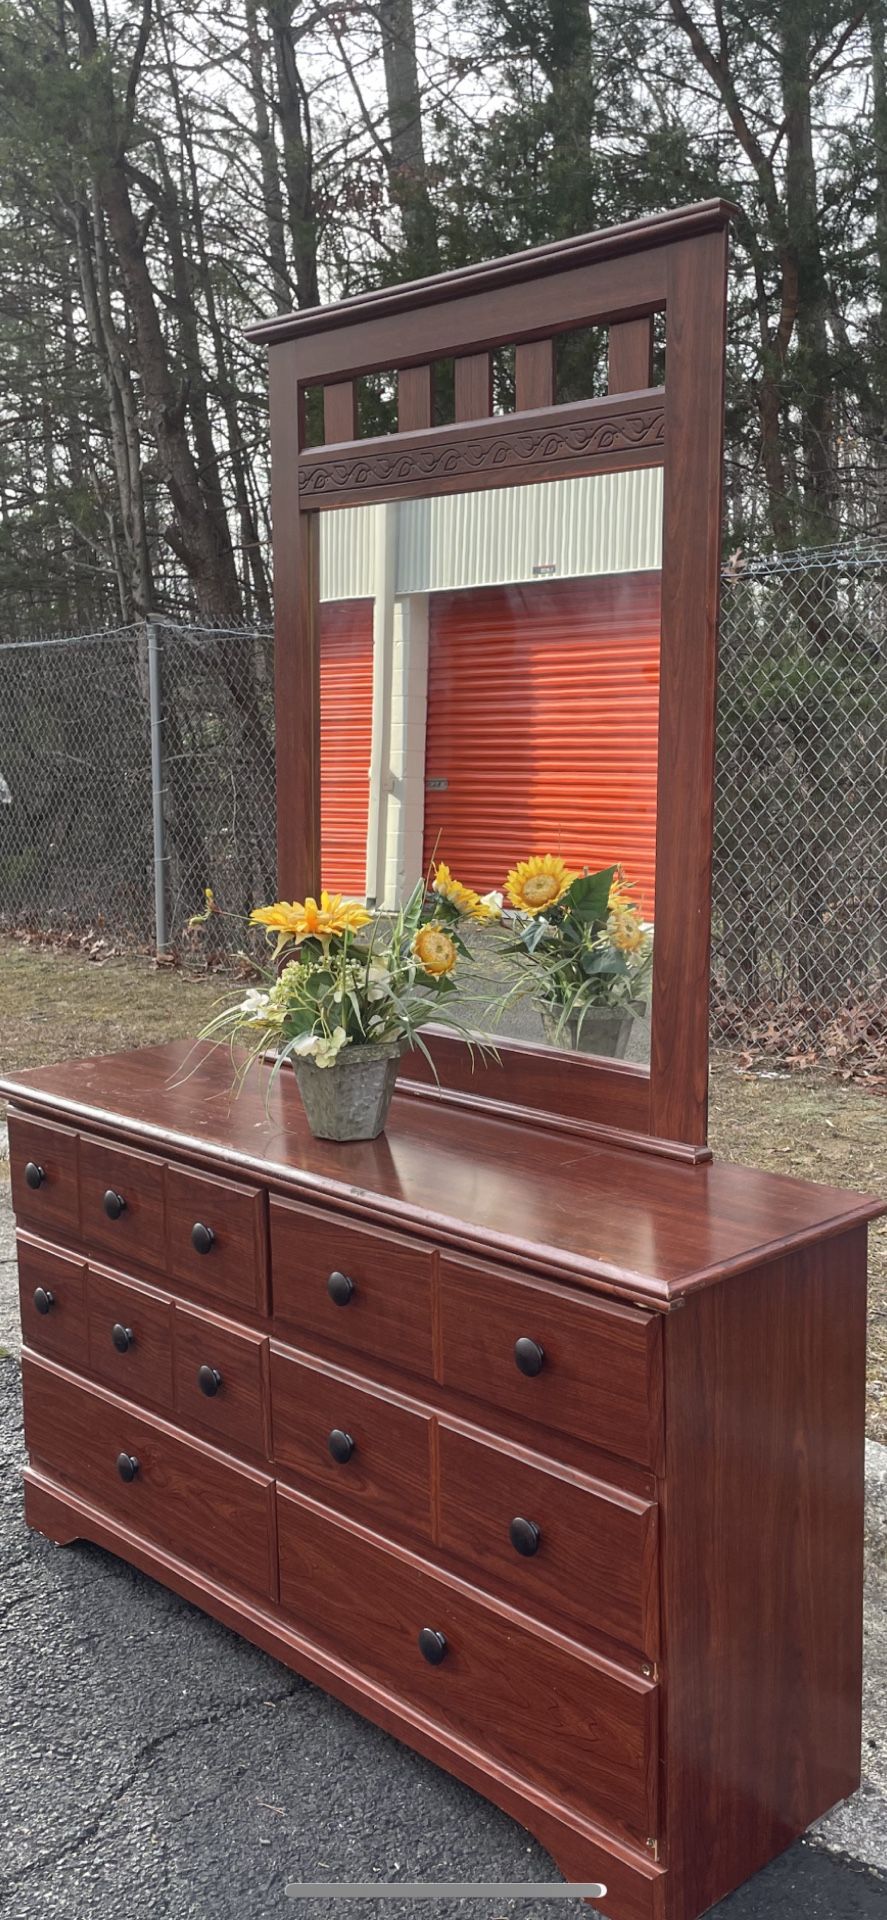 Modern Ashley Furniture Dresser With Mirror . Drawers Sliding Smoothly Great Confition